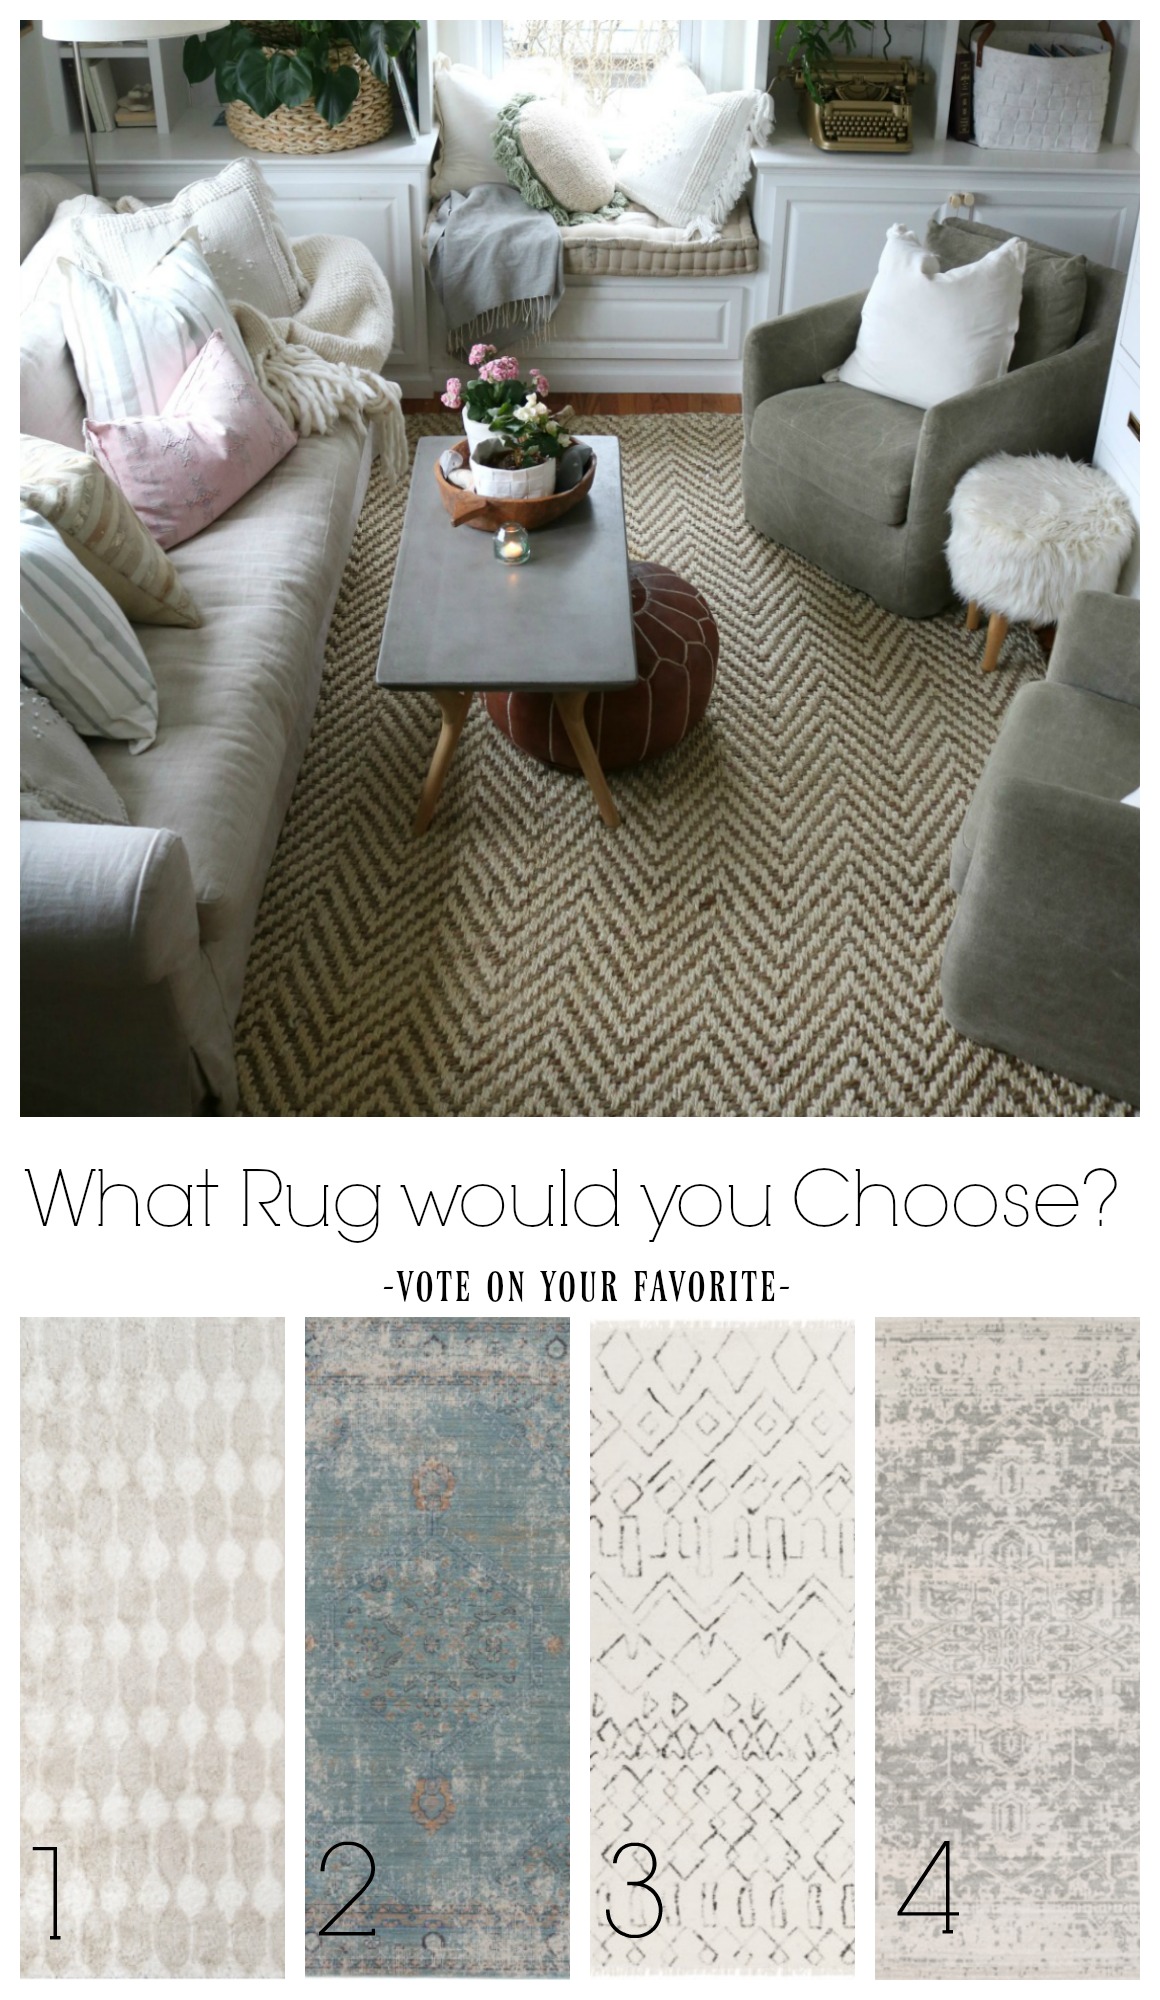 What Rug would you Choose?